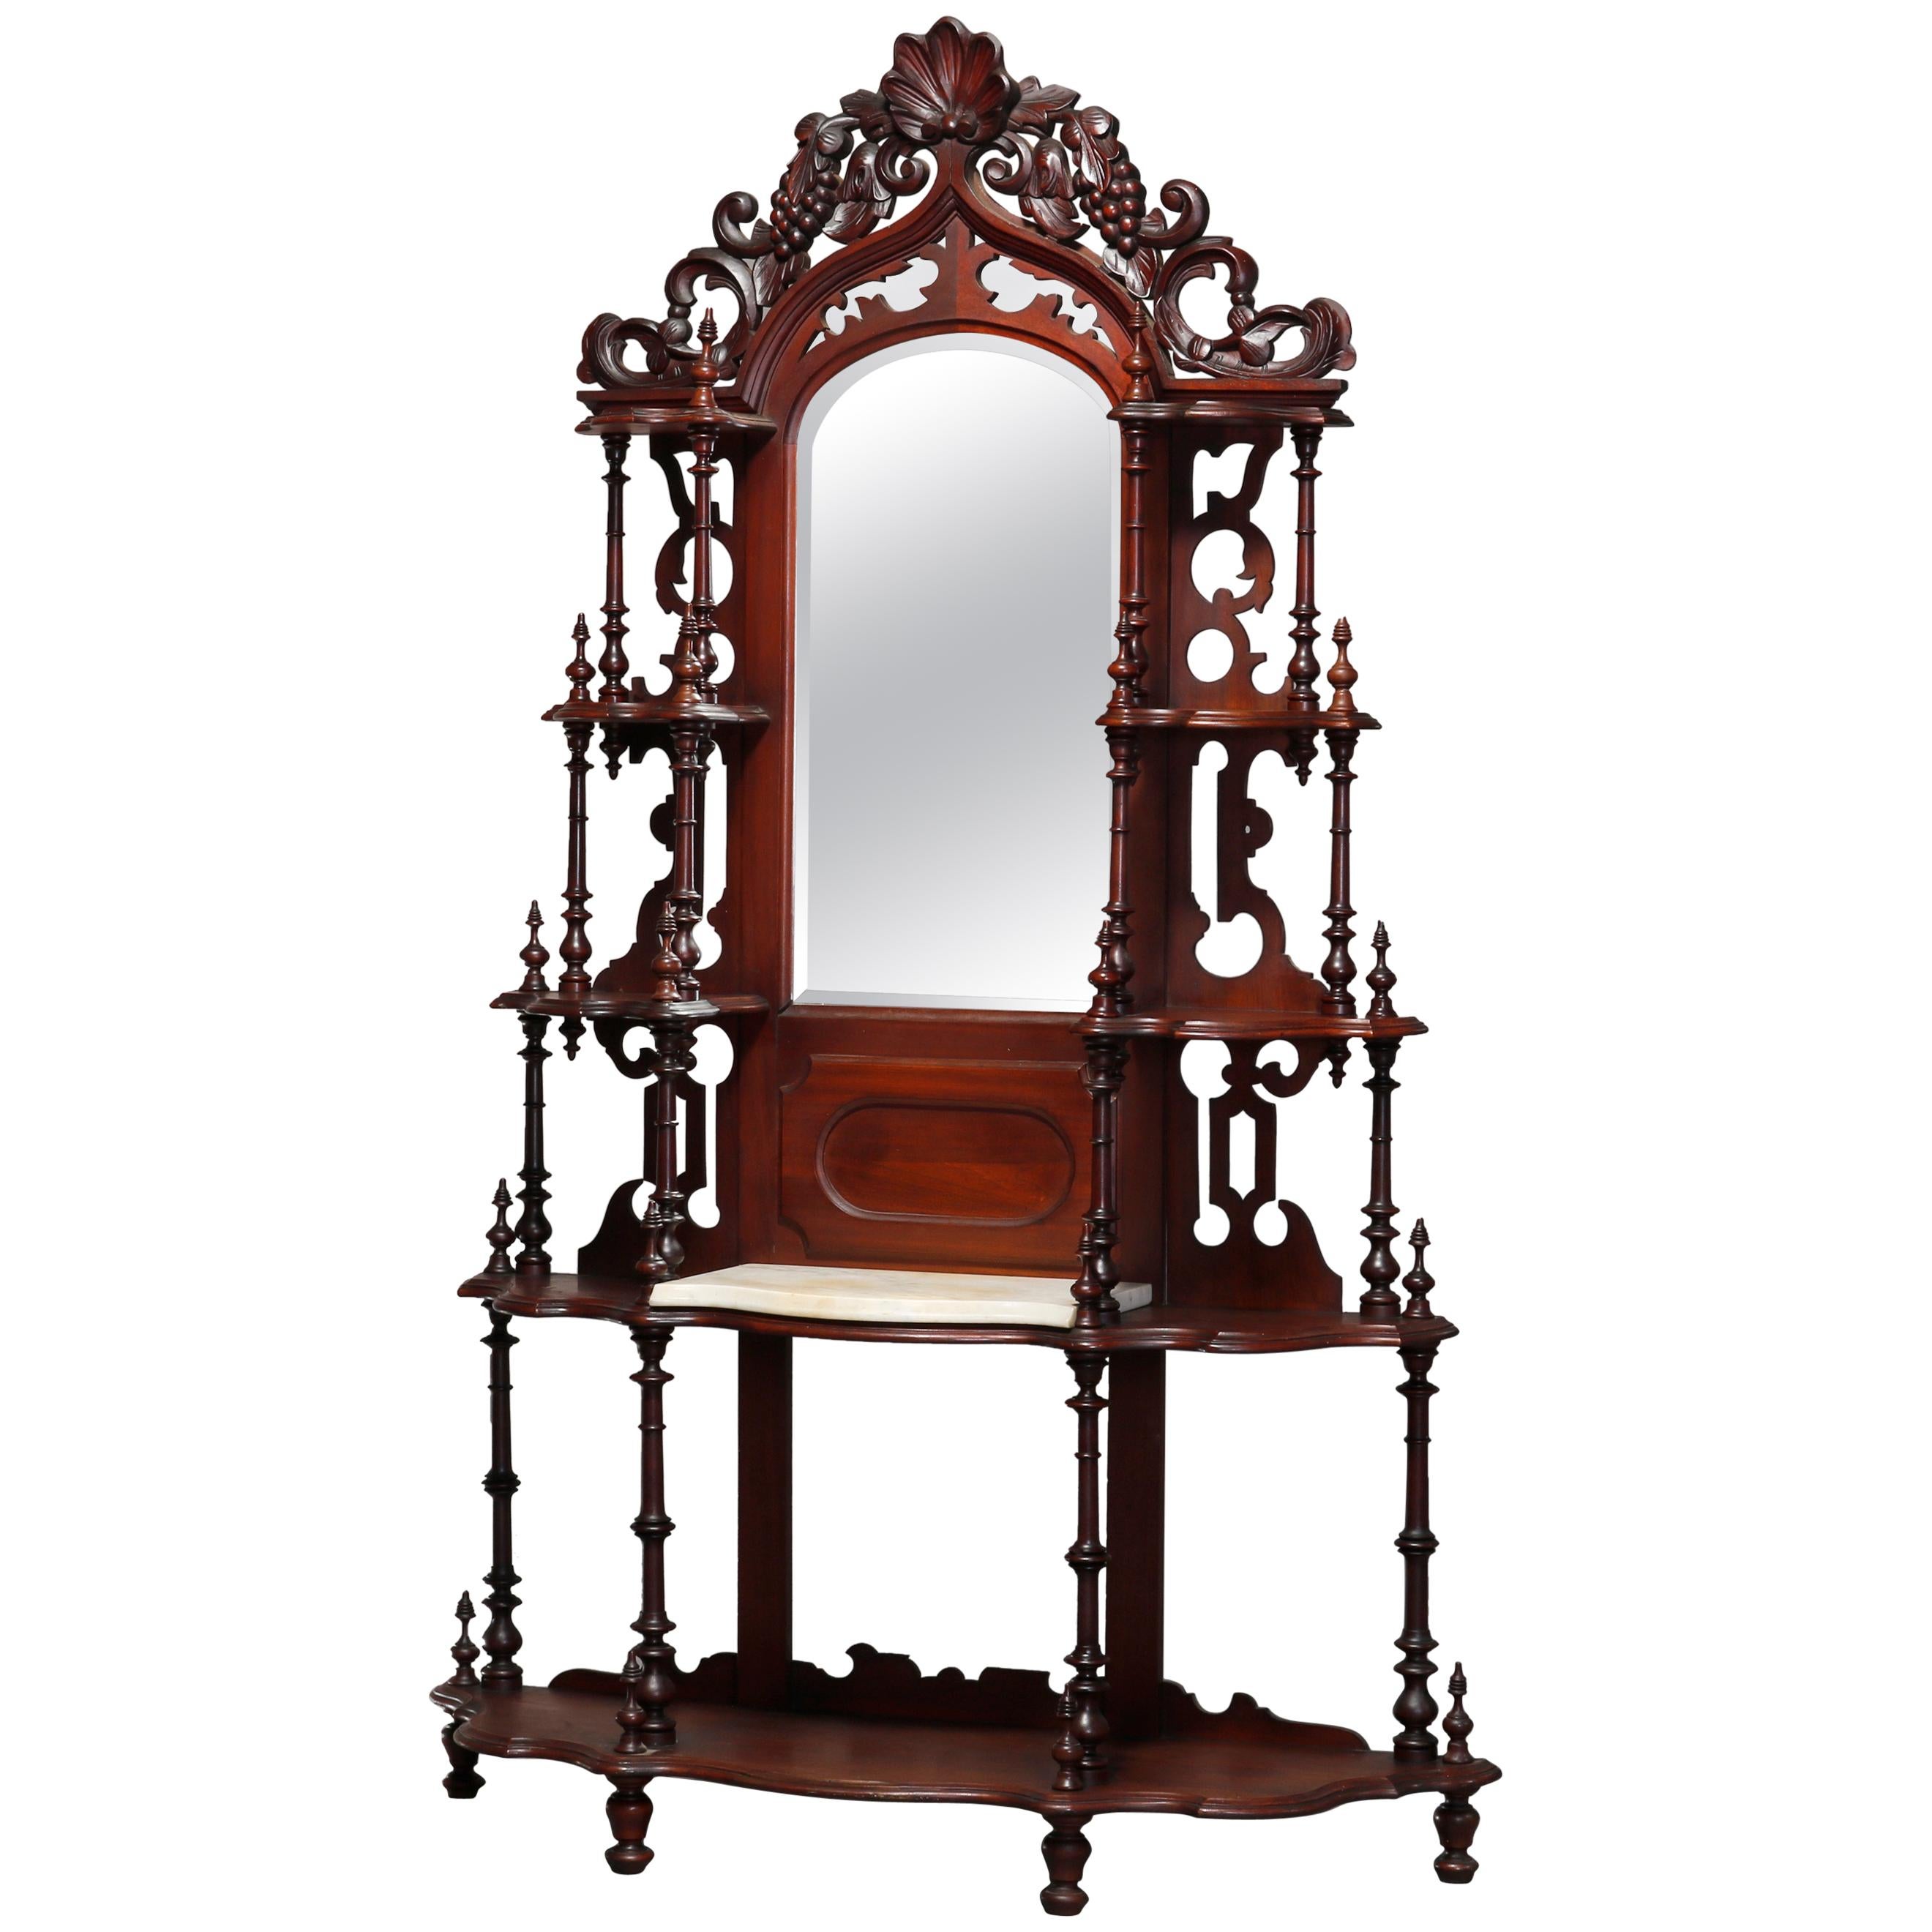 Antique French Victorian Carved Walnut & Marble Top Mirrored Étagère, circa 1890